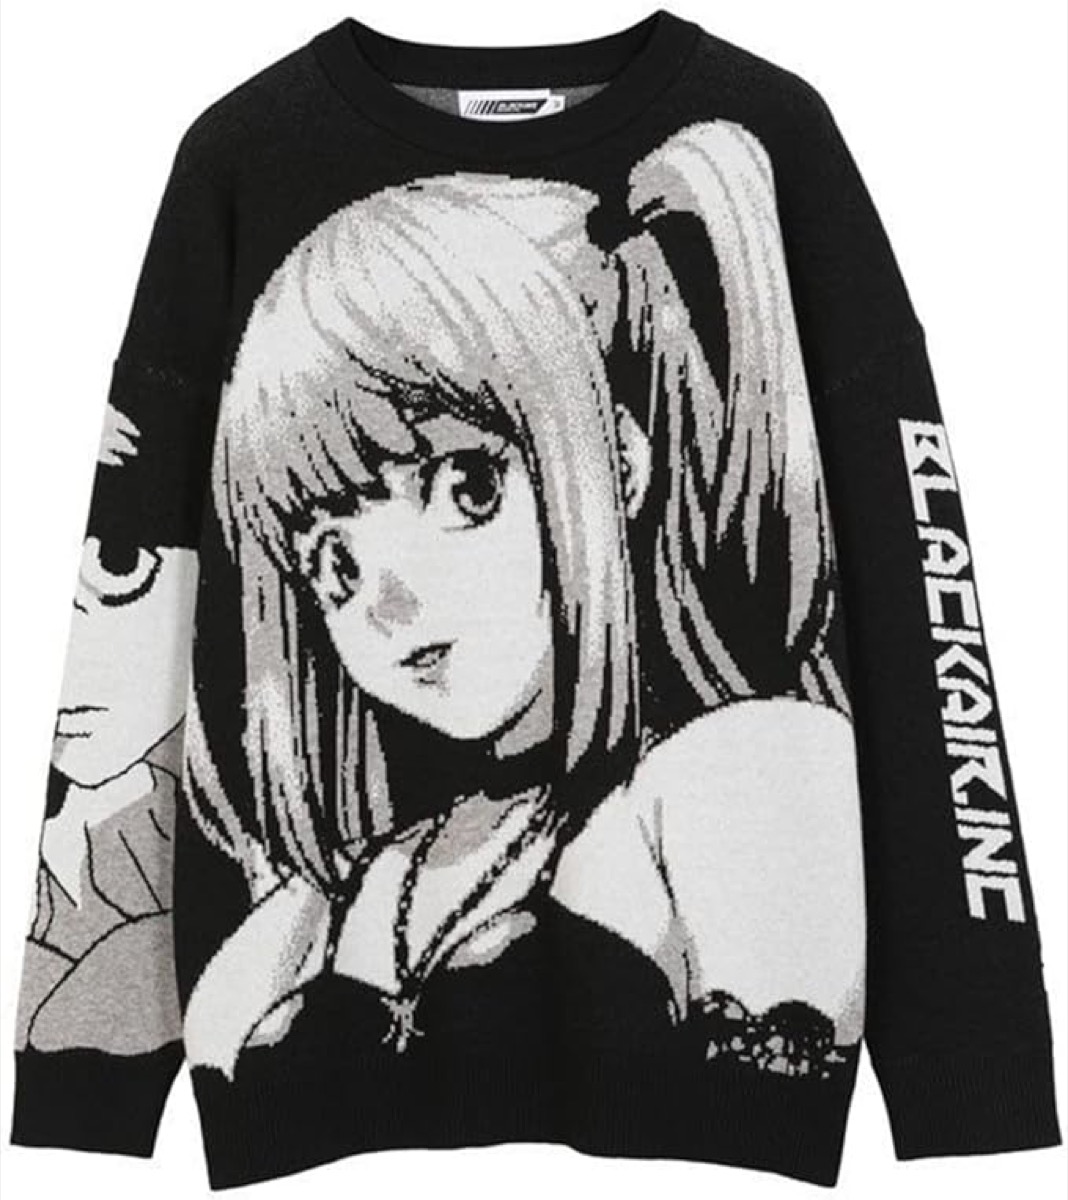 A sweater featuring Misa Misa and L from "Death Note"